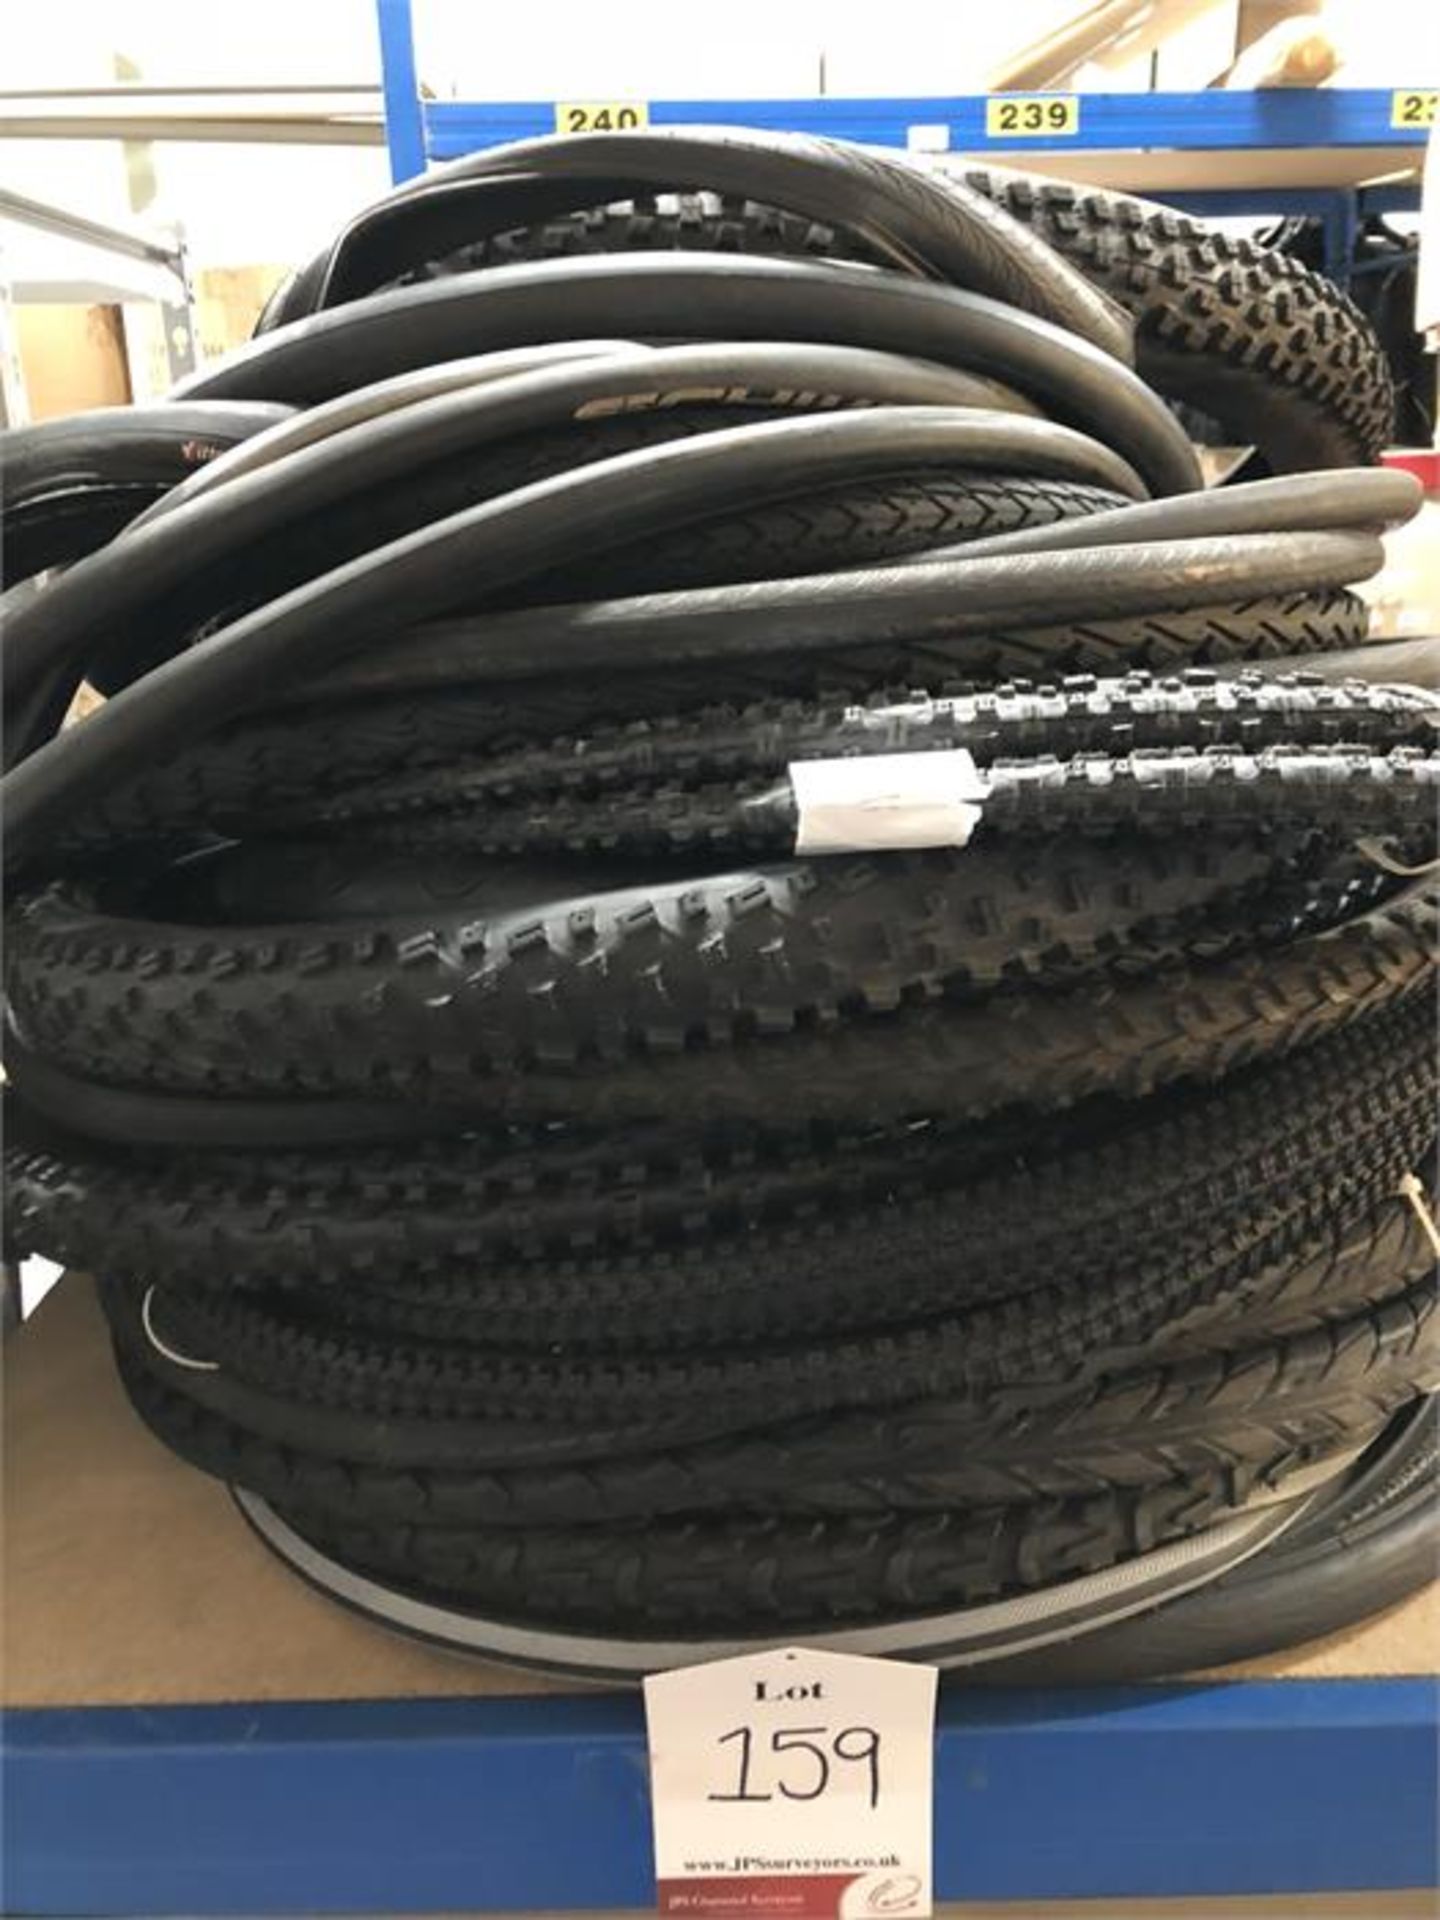 40 x Various Bike Tires in various Sizes and Styles